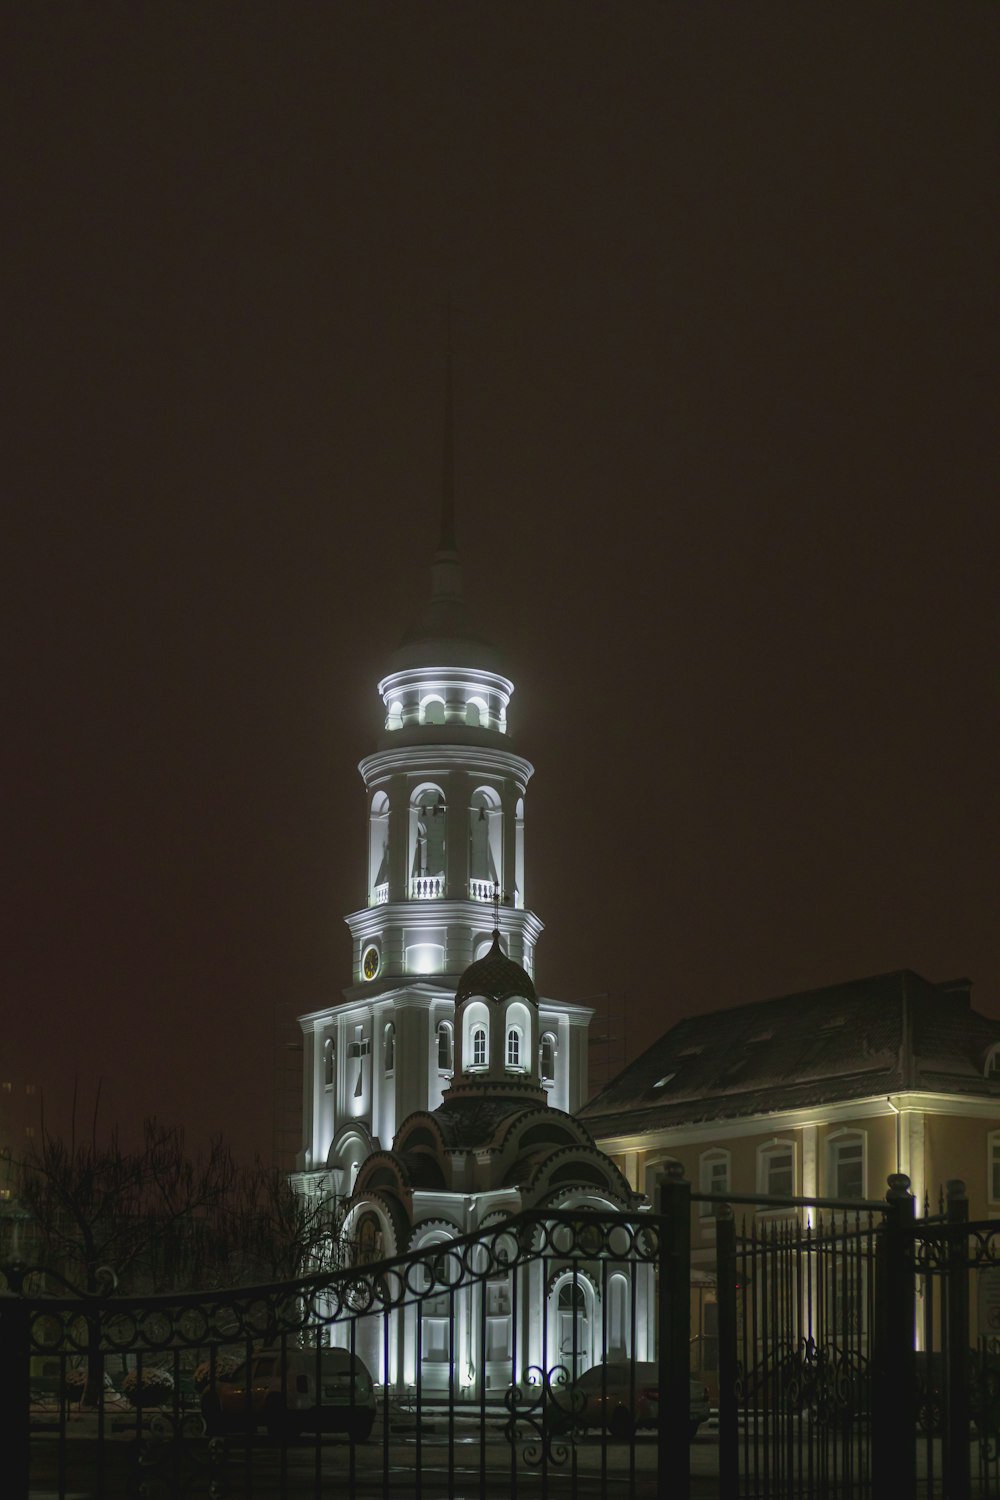 a large building with a clock tower lit up at night